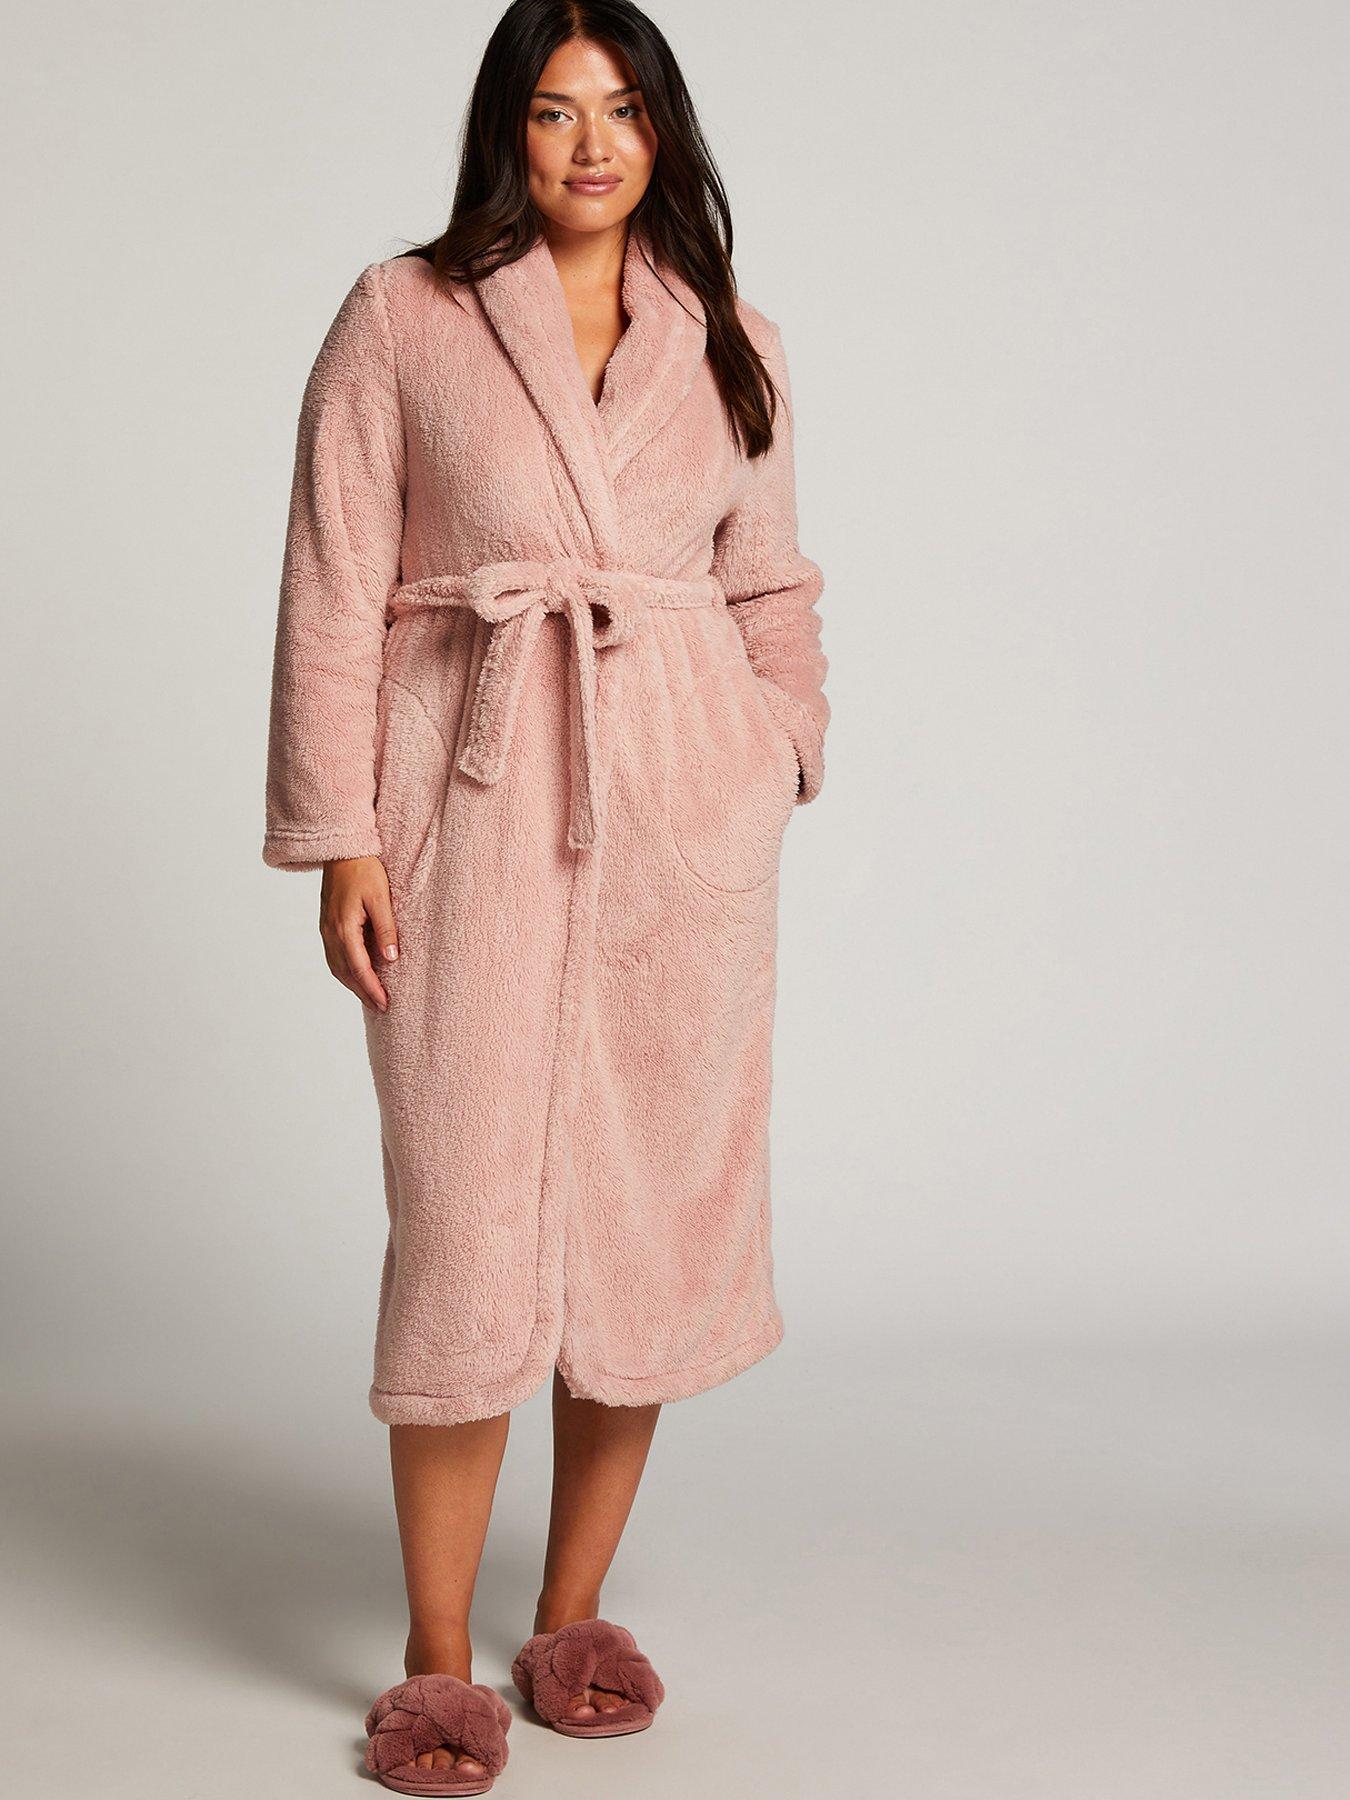 Glkaend Womens Cotton Robes Super Soft Cozy Unisex Thicken Full Length  Bathrobes Pajama Lounge with Pockets,Blue,L at Amazon Women's Clothing store